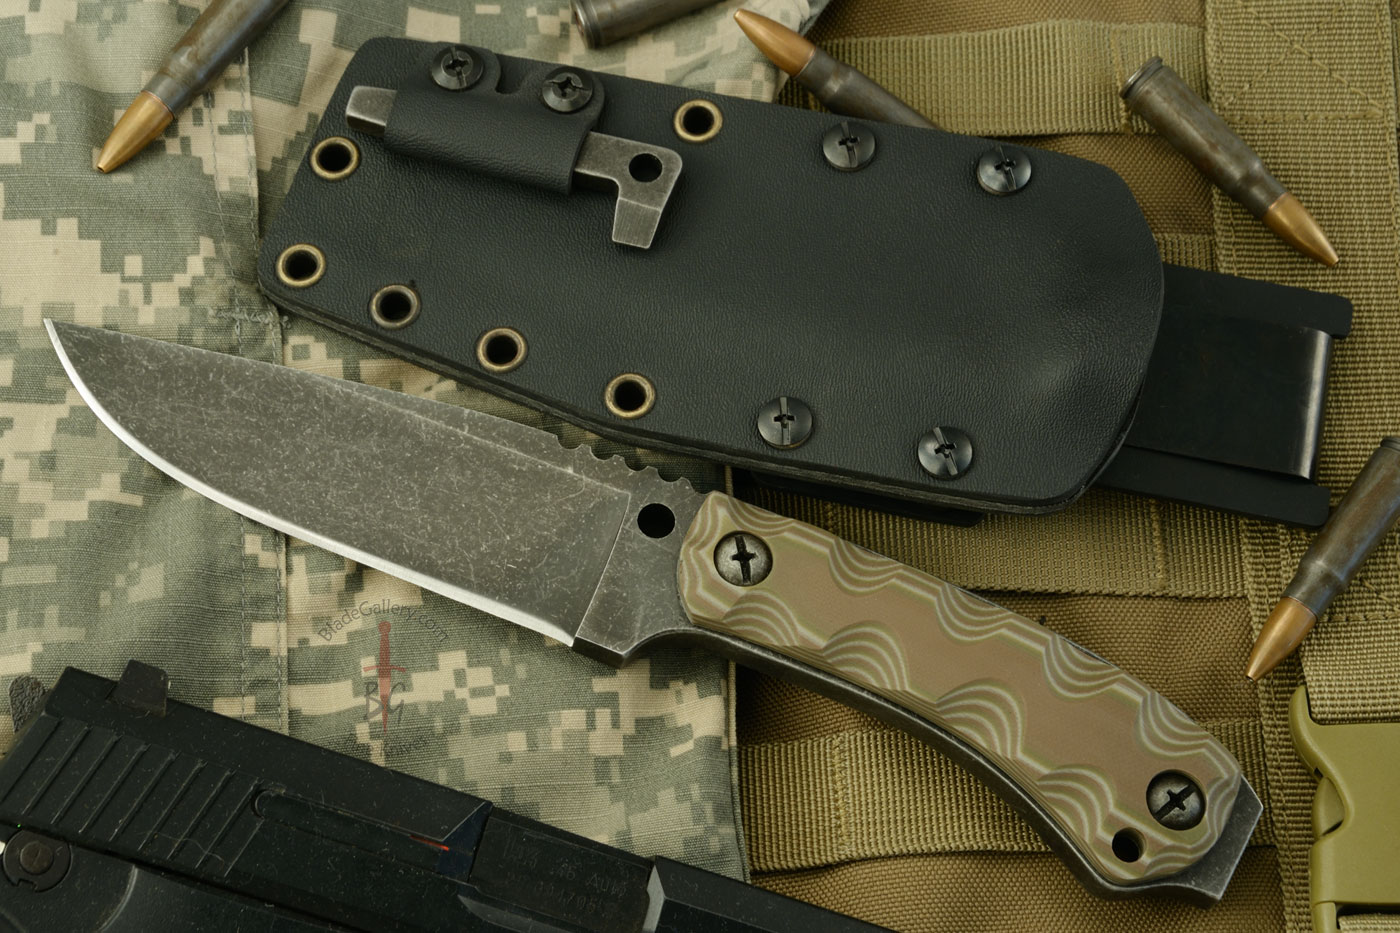 Survival Striker with Sculpted Desert Camouflage G10 - Individually Numbered